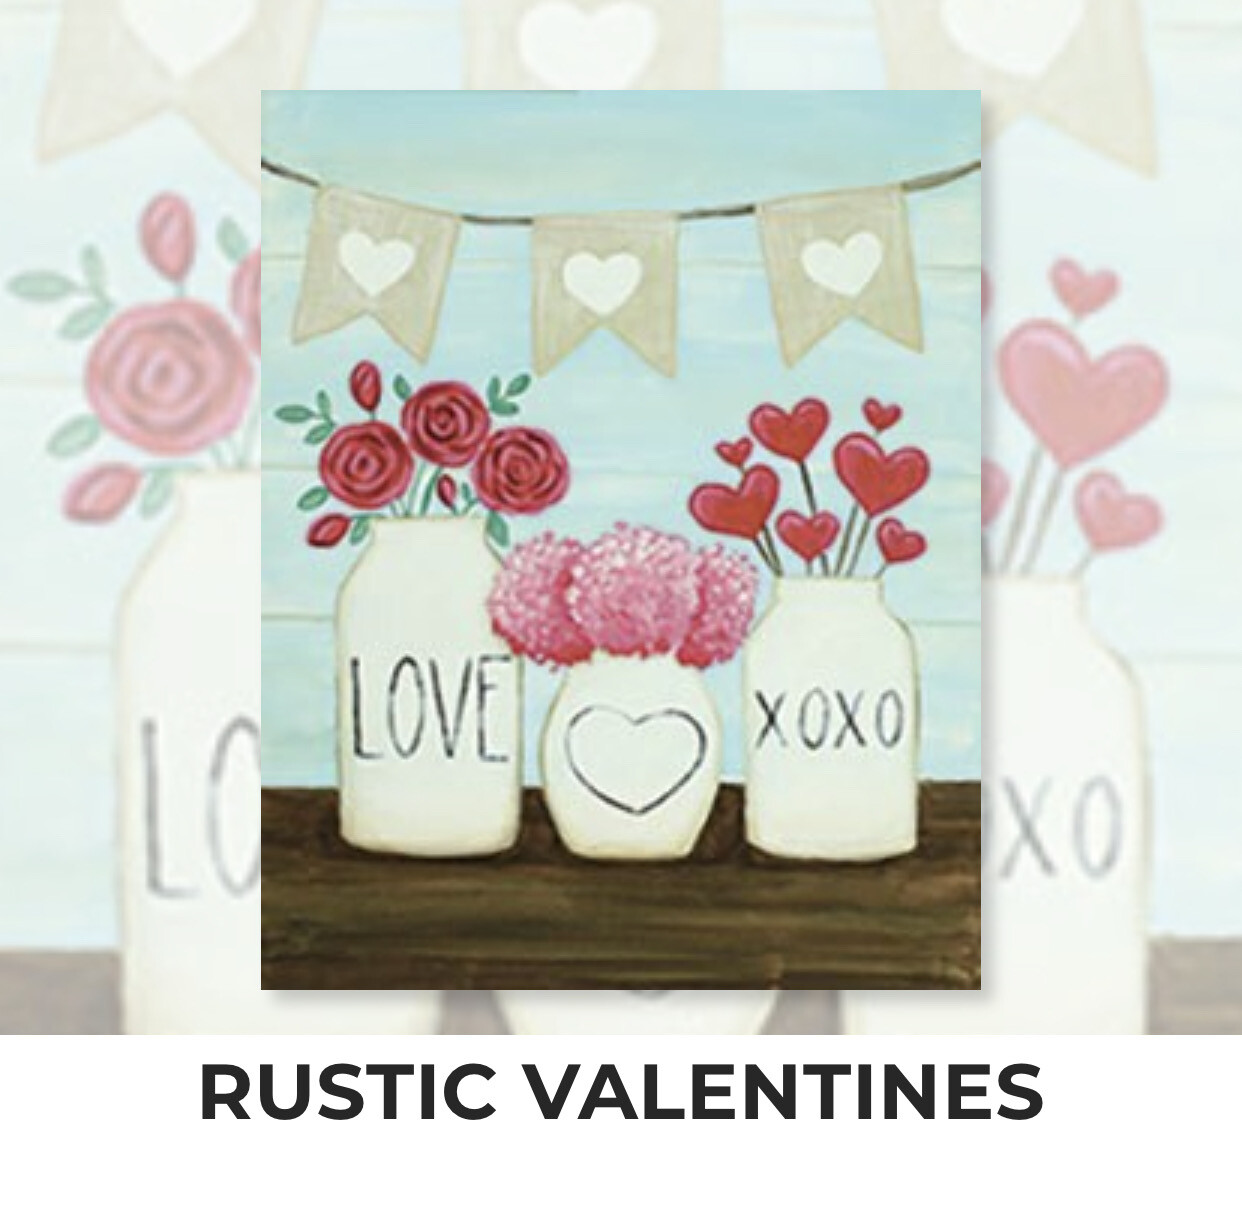 Rustic Valentines ADULT Acrylic Paint On Canvas DIY Art Kit - 3 Week Special Order